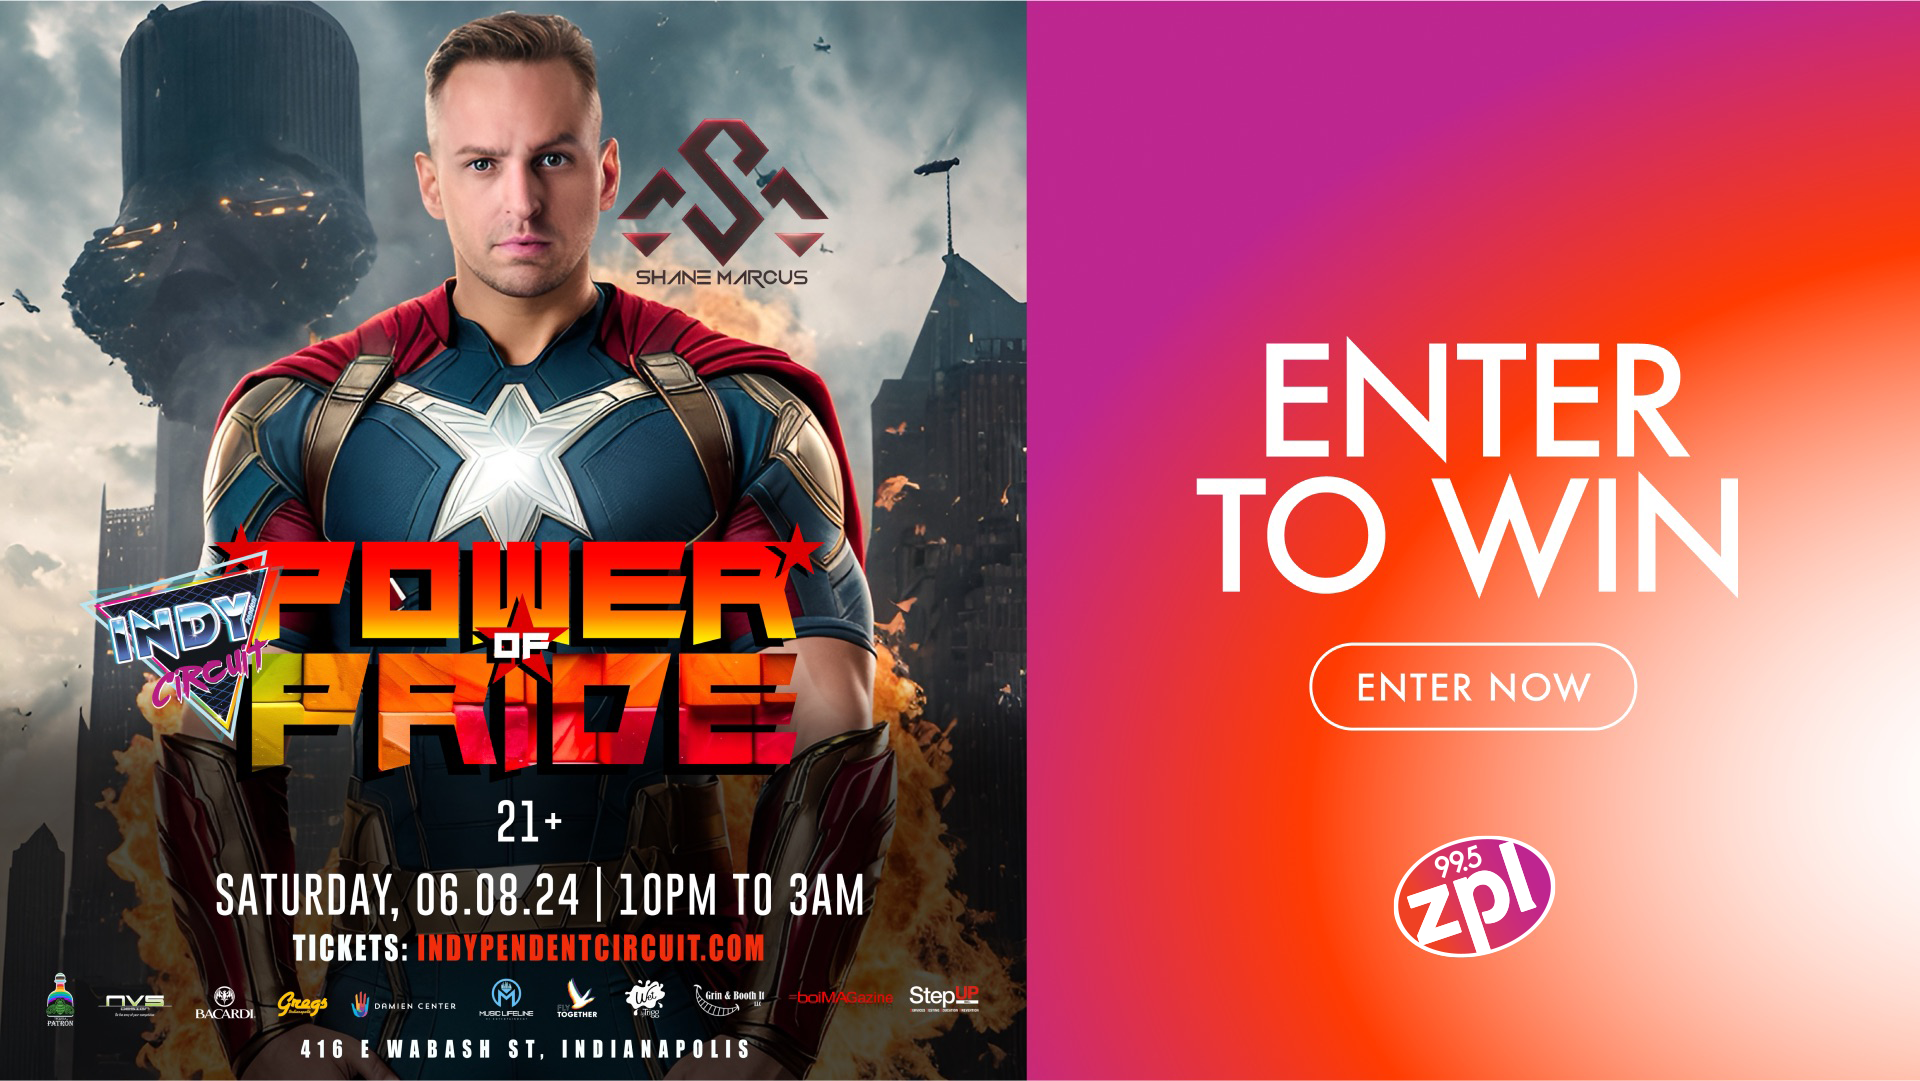 Enter To Win Tickets To Power of PRIDE